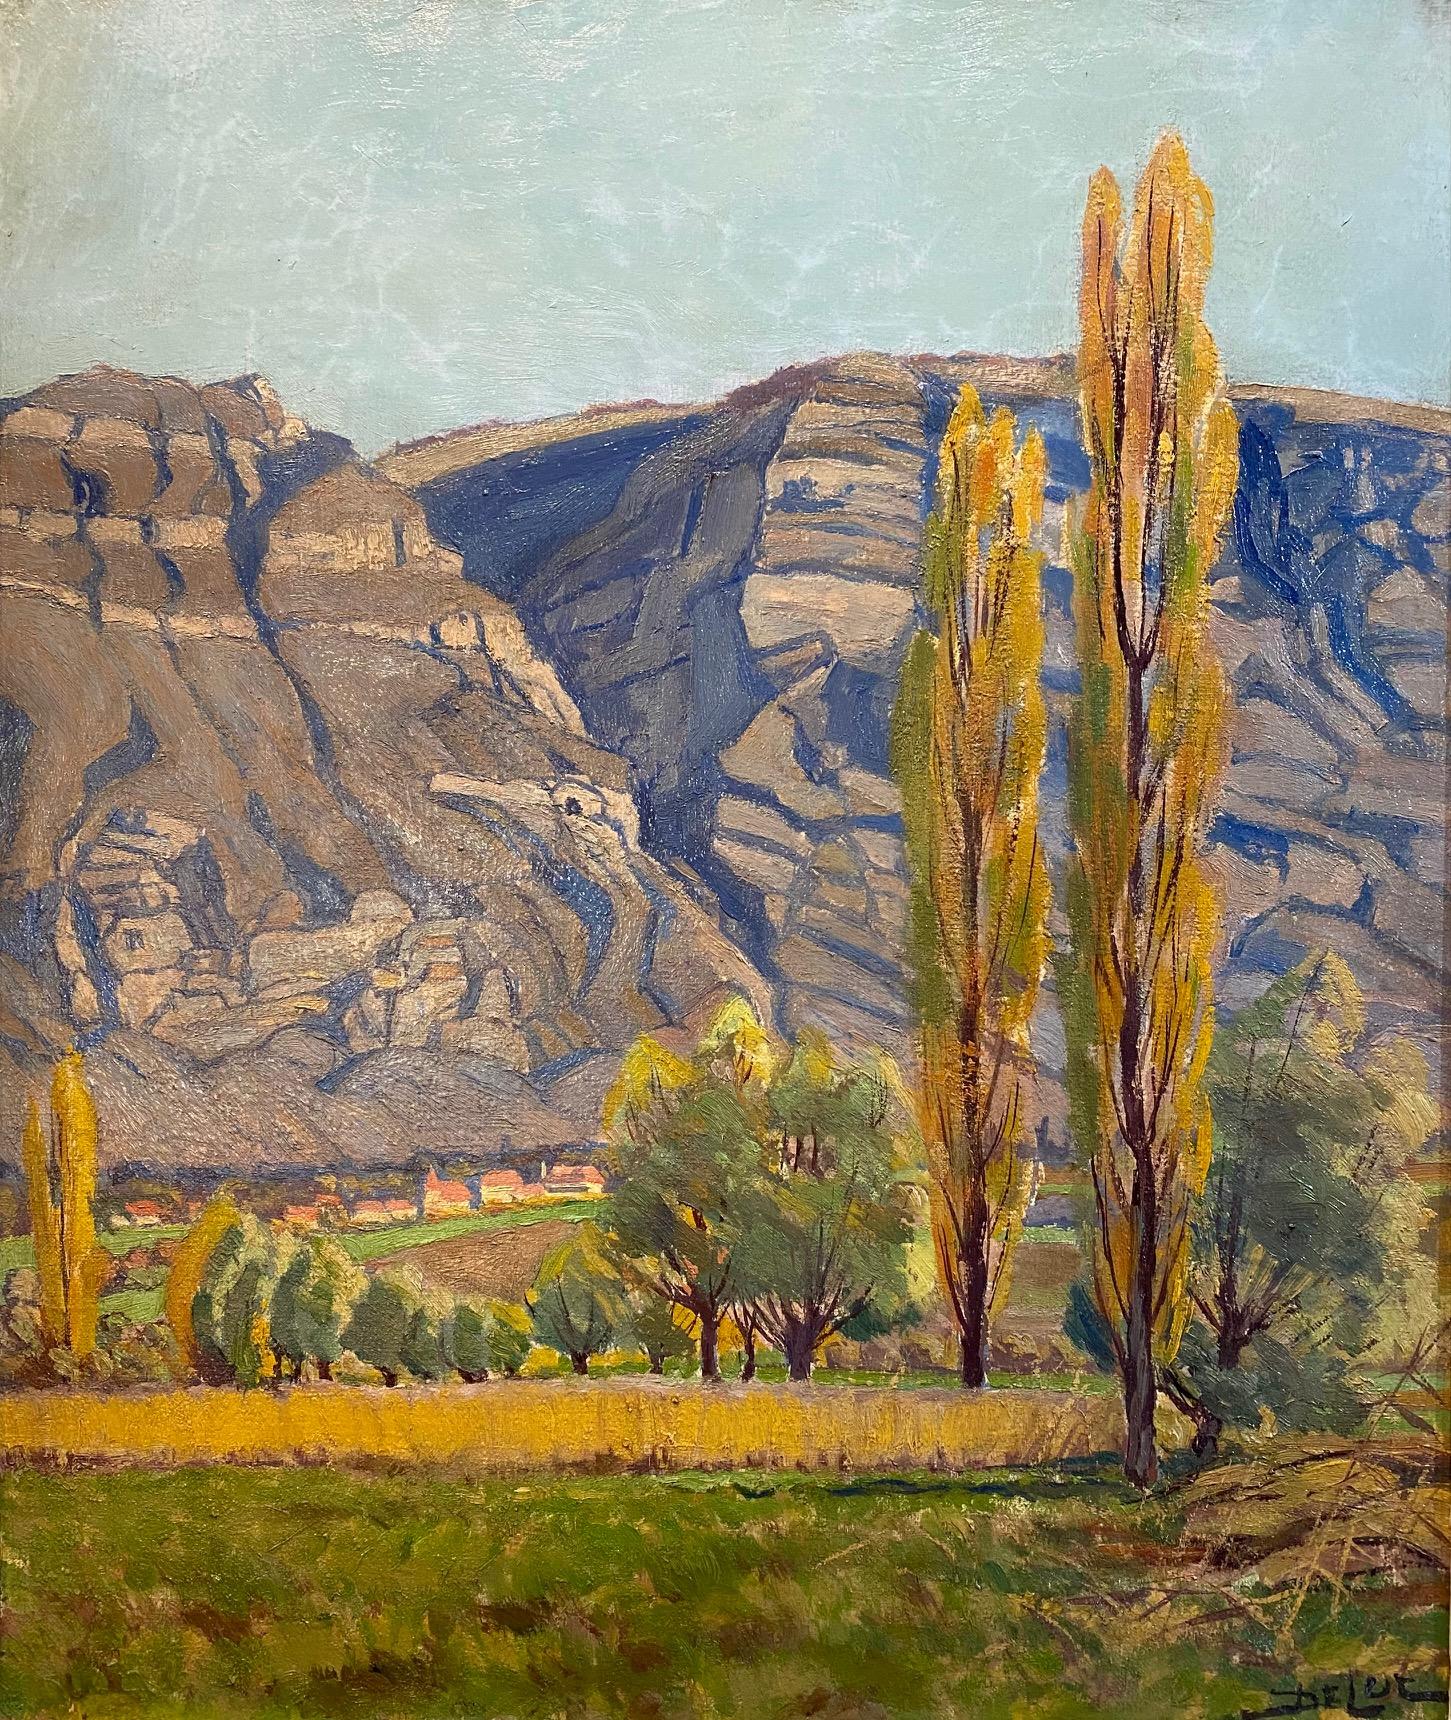 The Great gorge by John Henri Deluc - Oil on canvas 55x46 cm 4